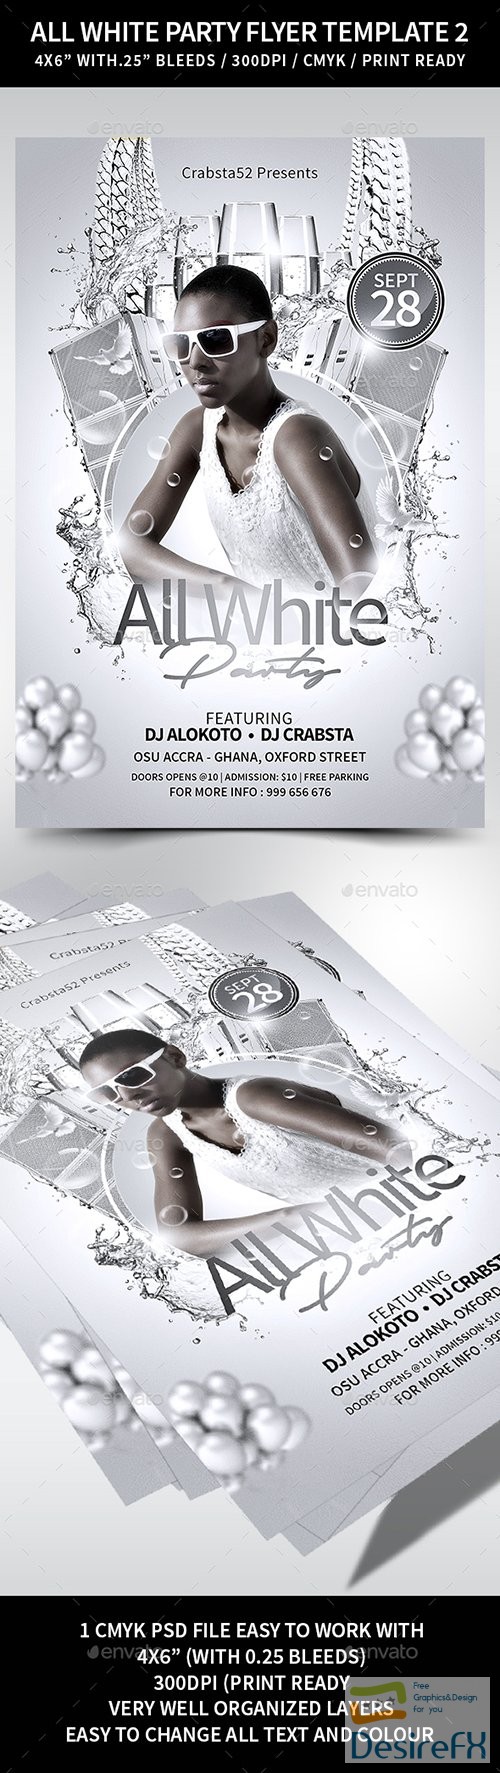 GR - All White Party Flyer Template 2 22351528